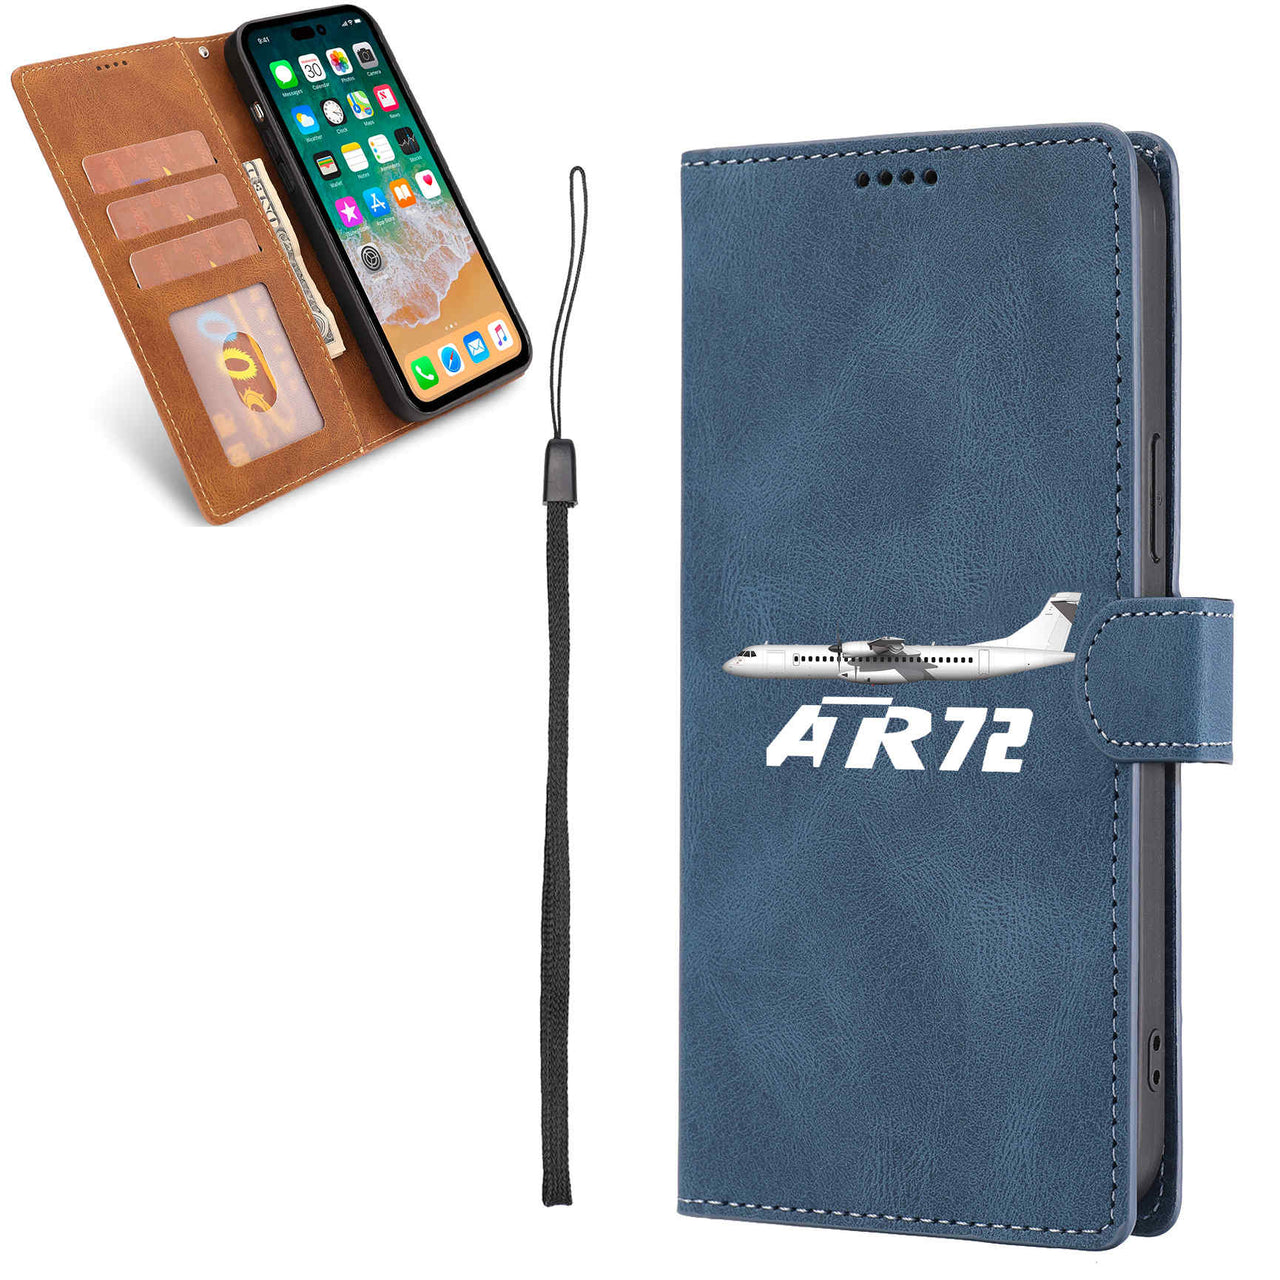 The ATR72 Leather Samsung A Cases